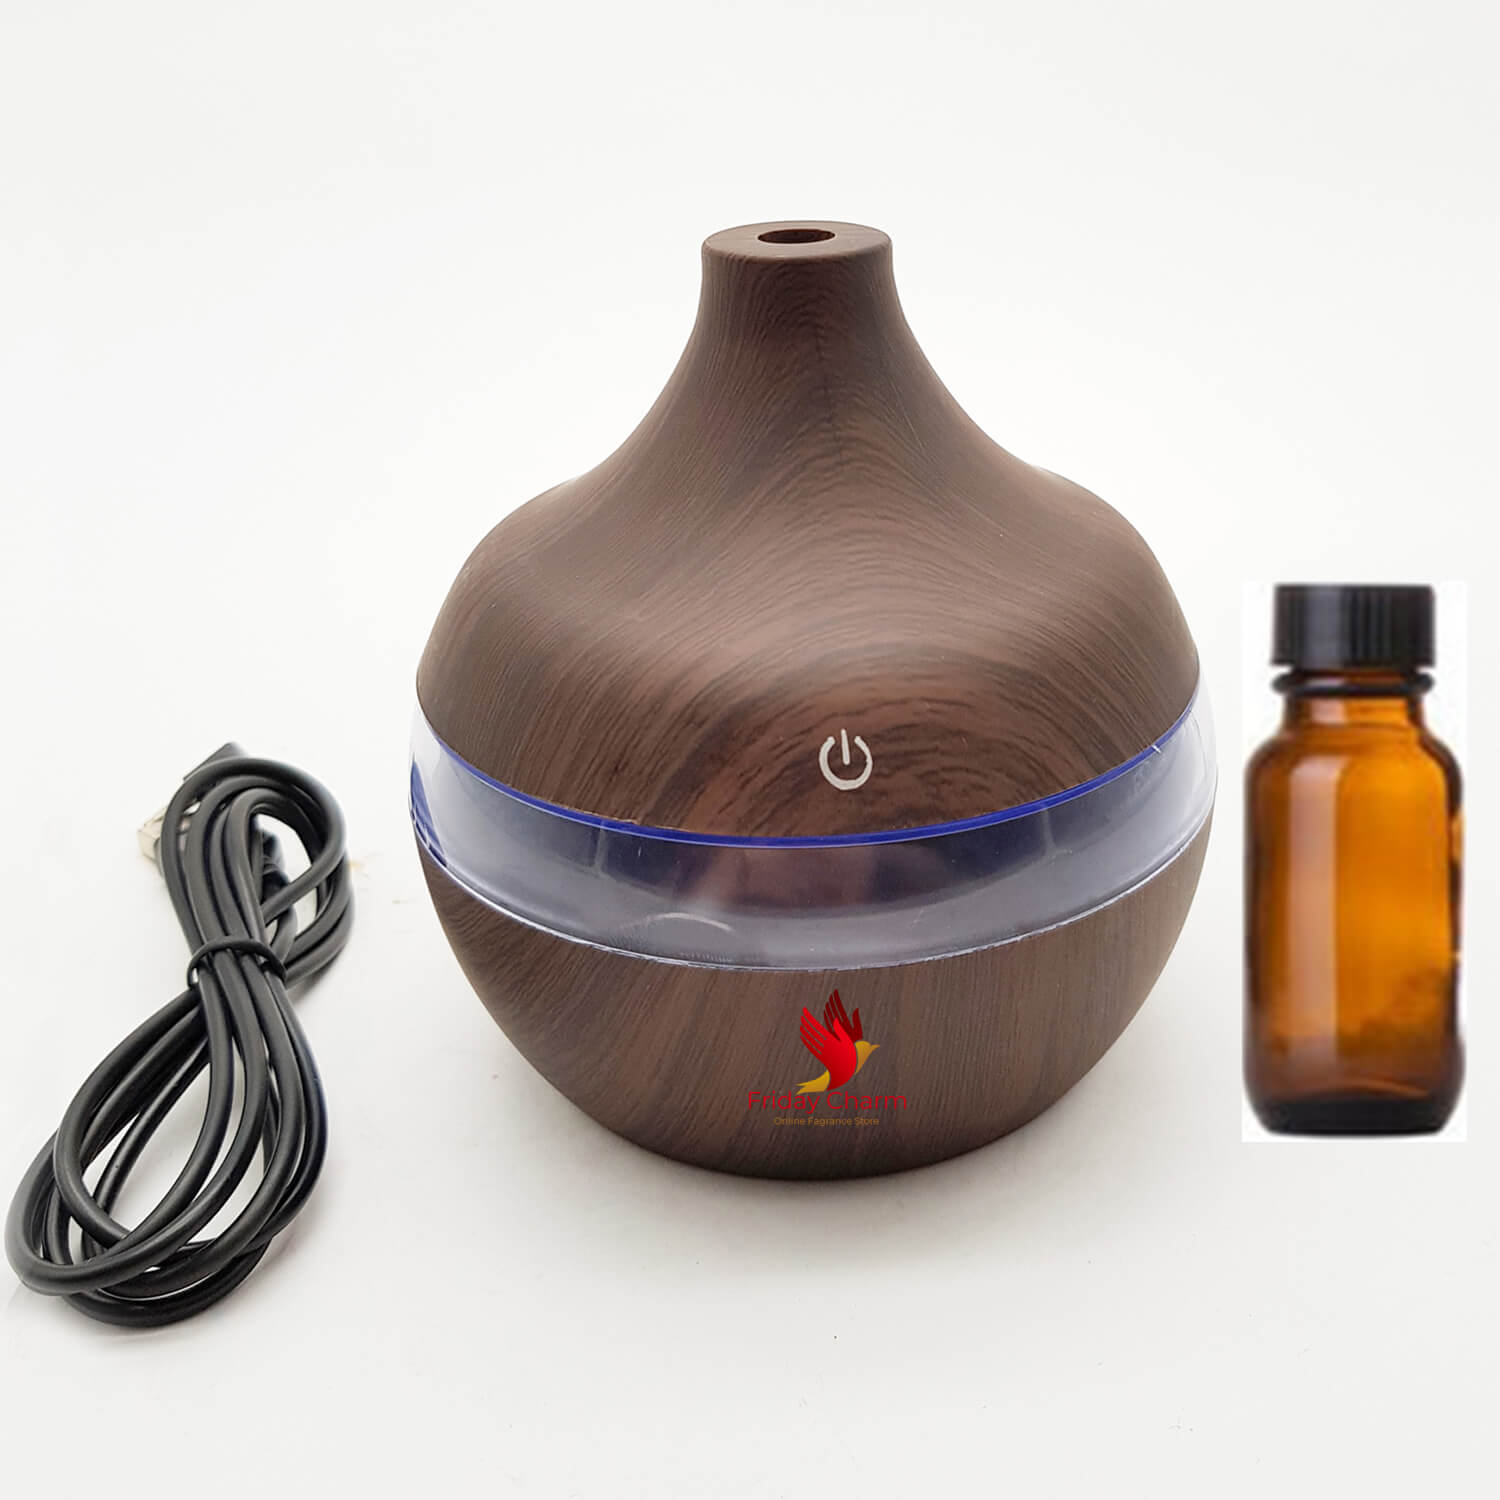 Electrical Aroma Oil Diffuser With Aroma Oil 1031 - Dark Brown